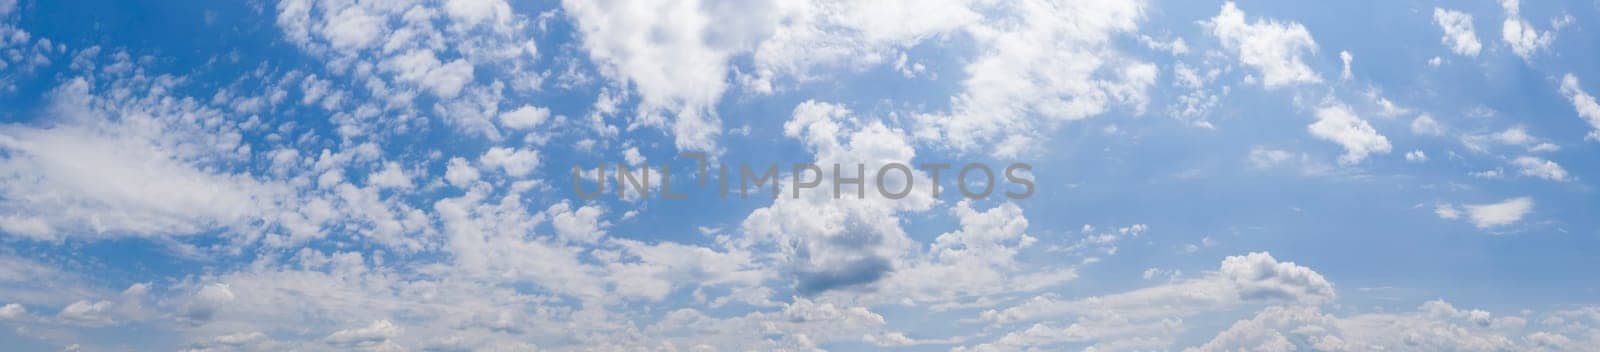 Panoramic view of blue sky with clouds and sunlight by EdVal